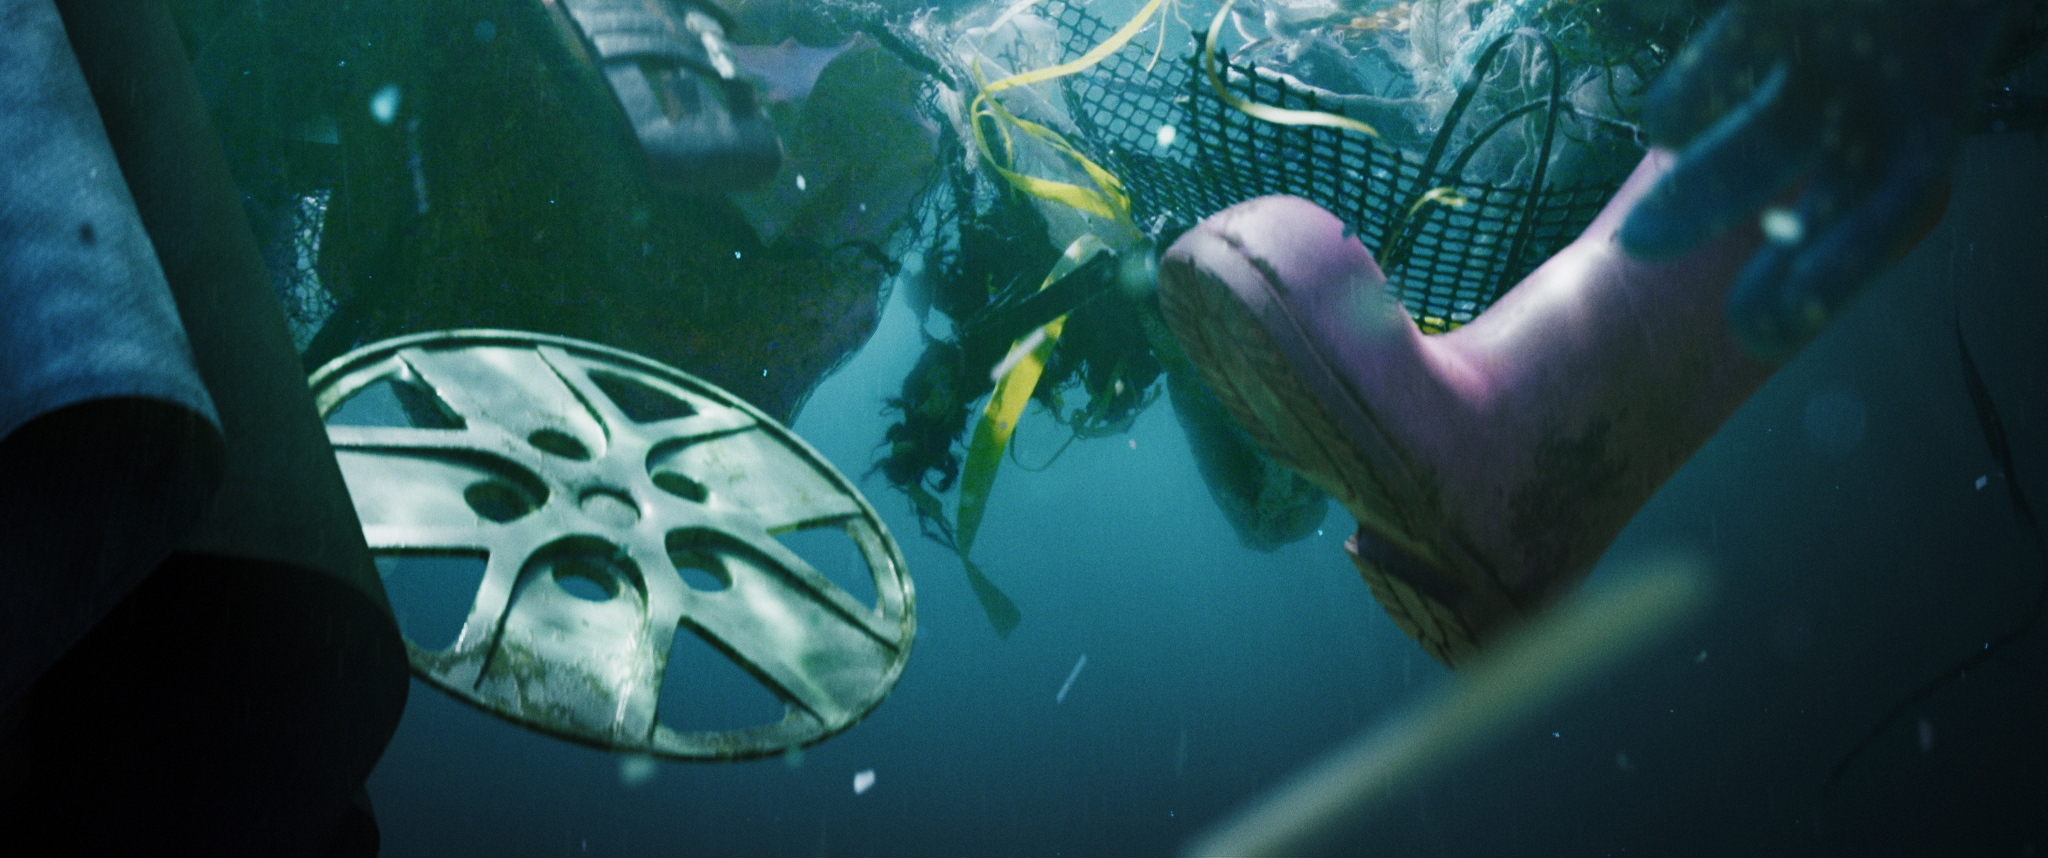 Various pieces of rubbish floating in the ocean, including a hubcap and wellington boot.